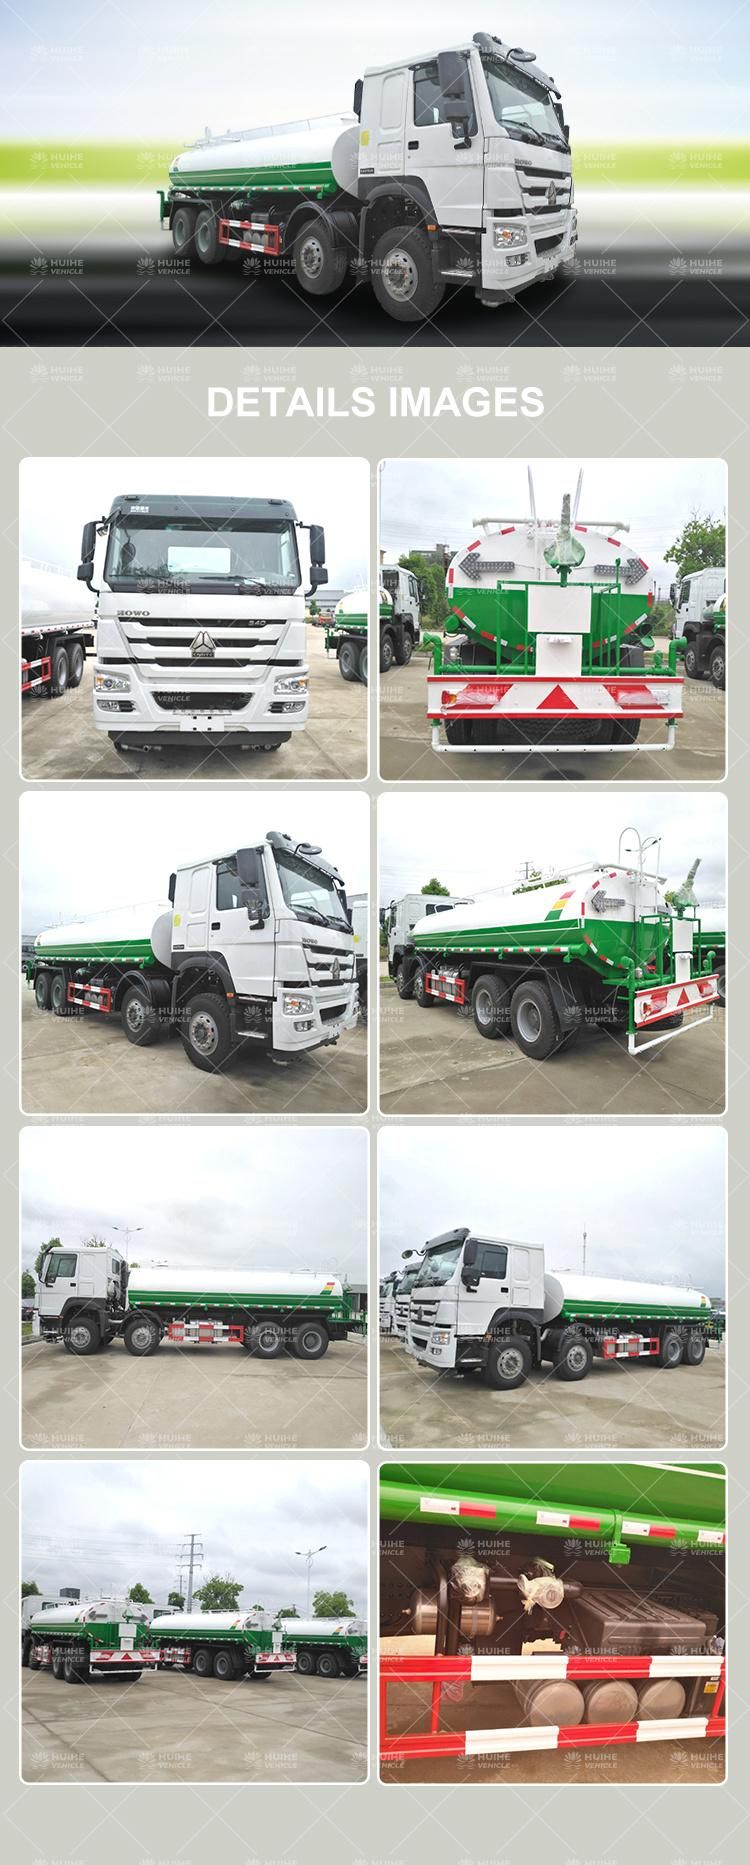 Used Sinotruk HOWO 6X4 HOWO Water Tanker Truck China Manufacturer Used Water Tanker Truck